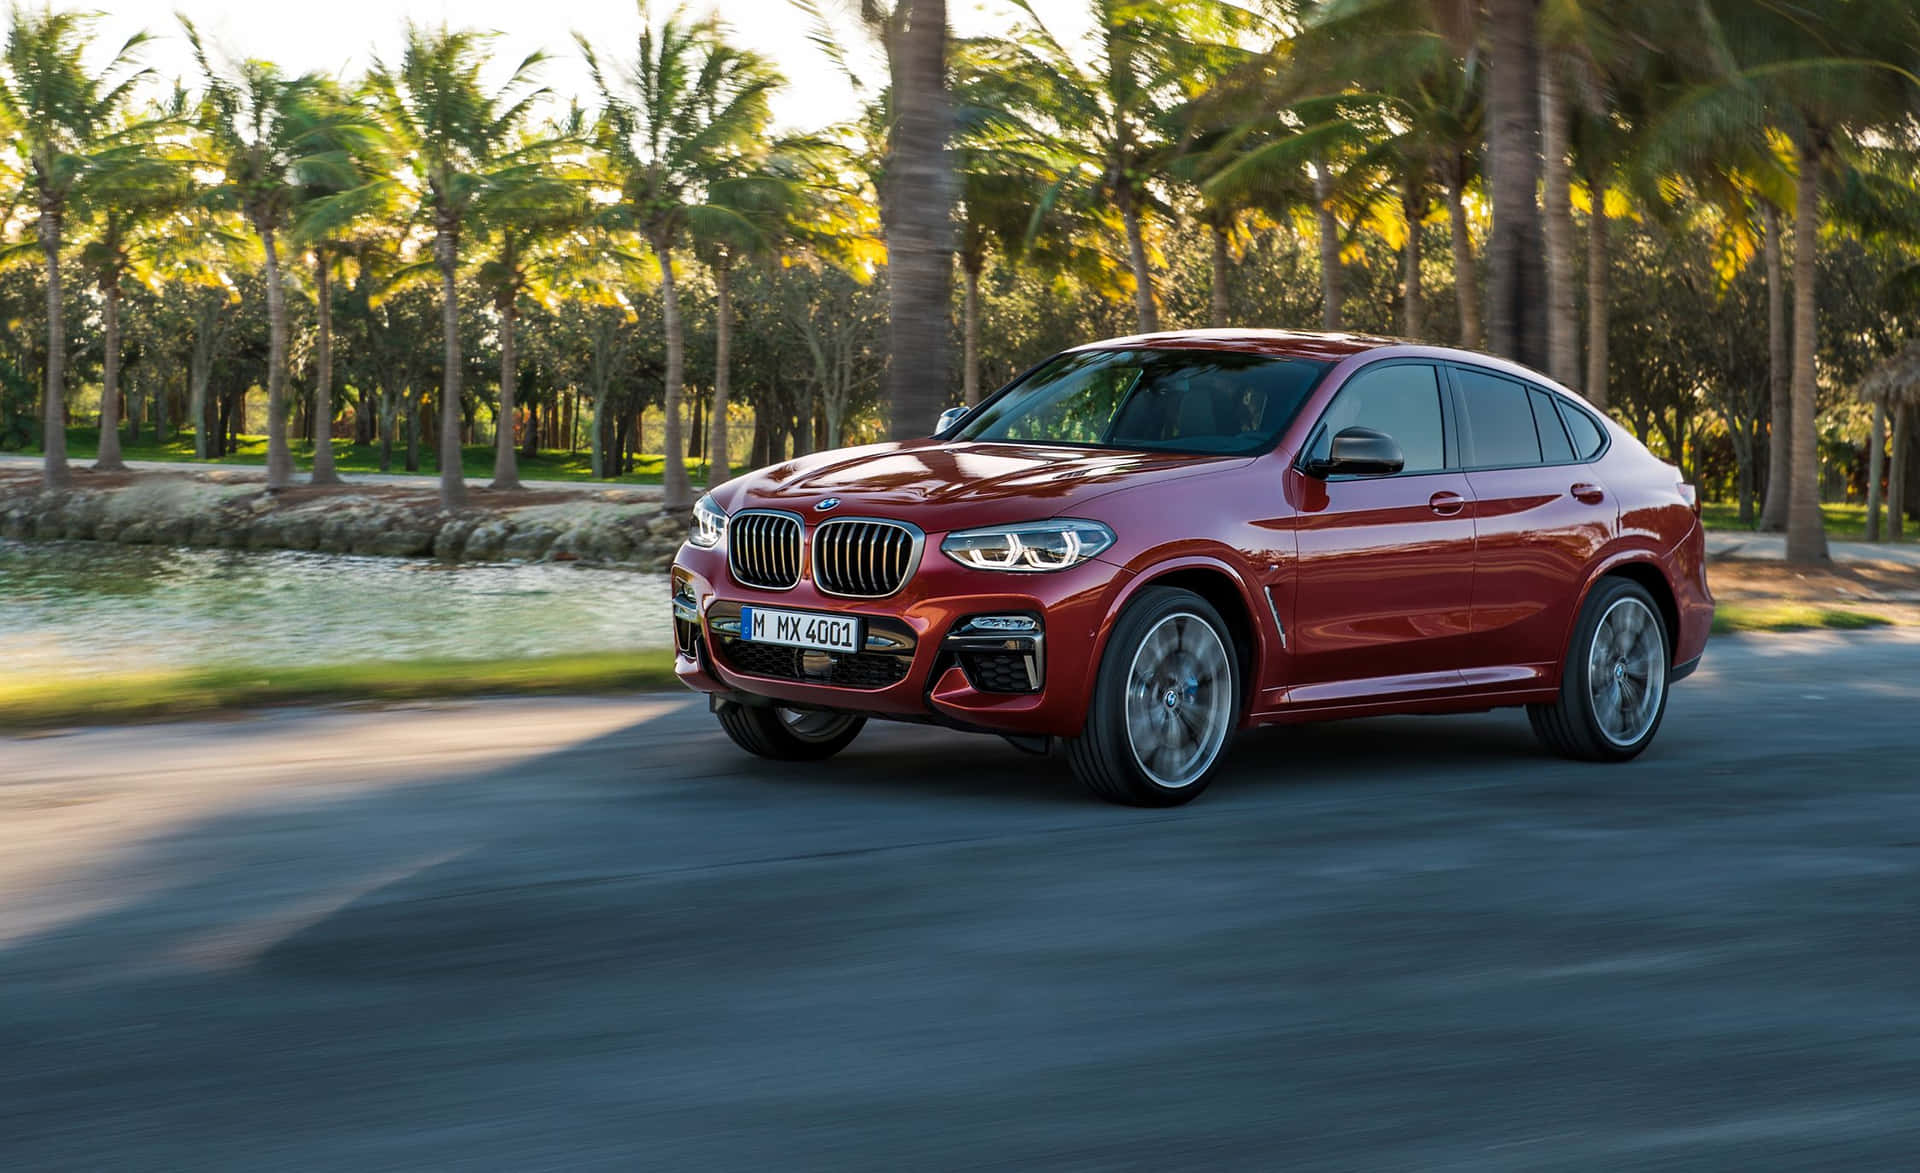 BMW X4 Gliding on an Open Road Wallpaper